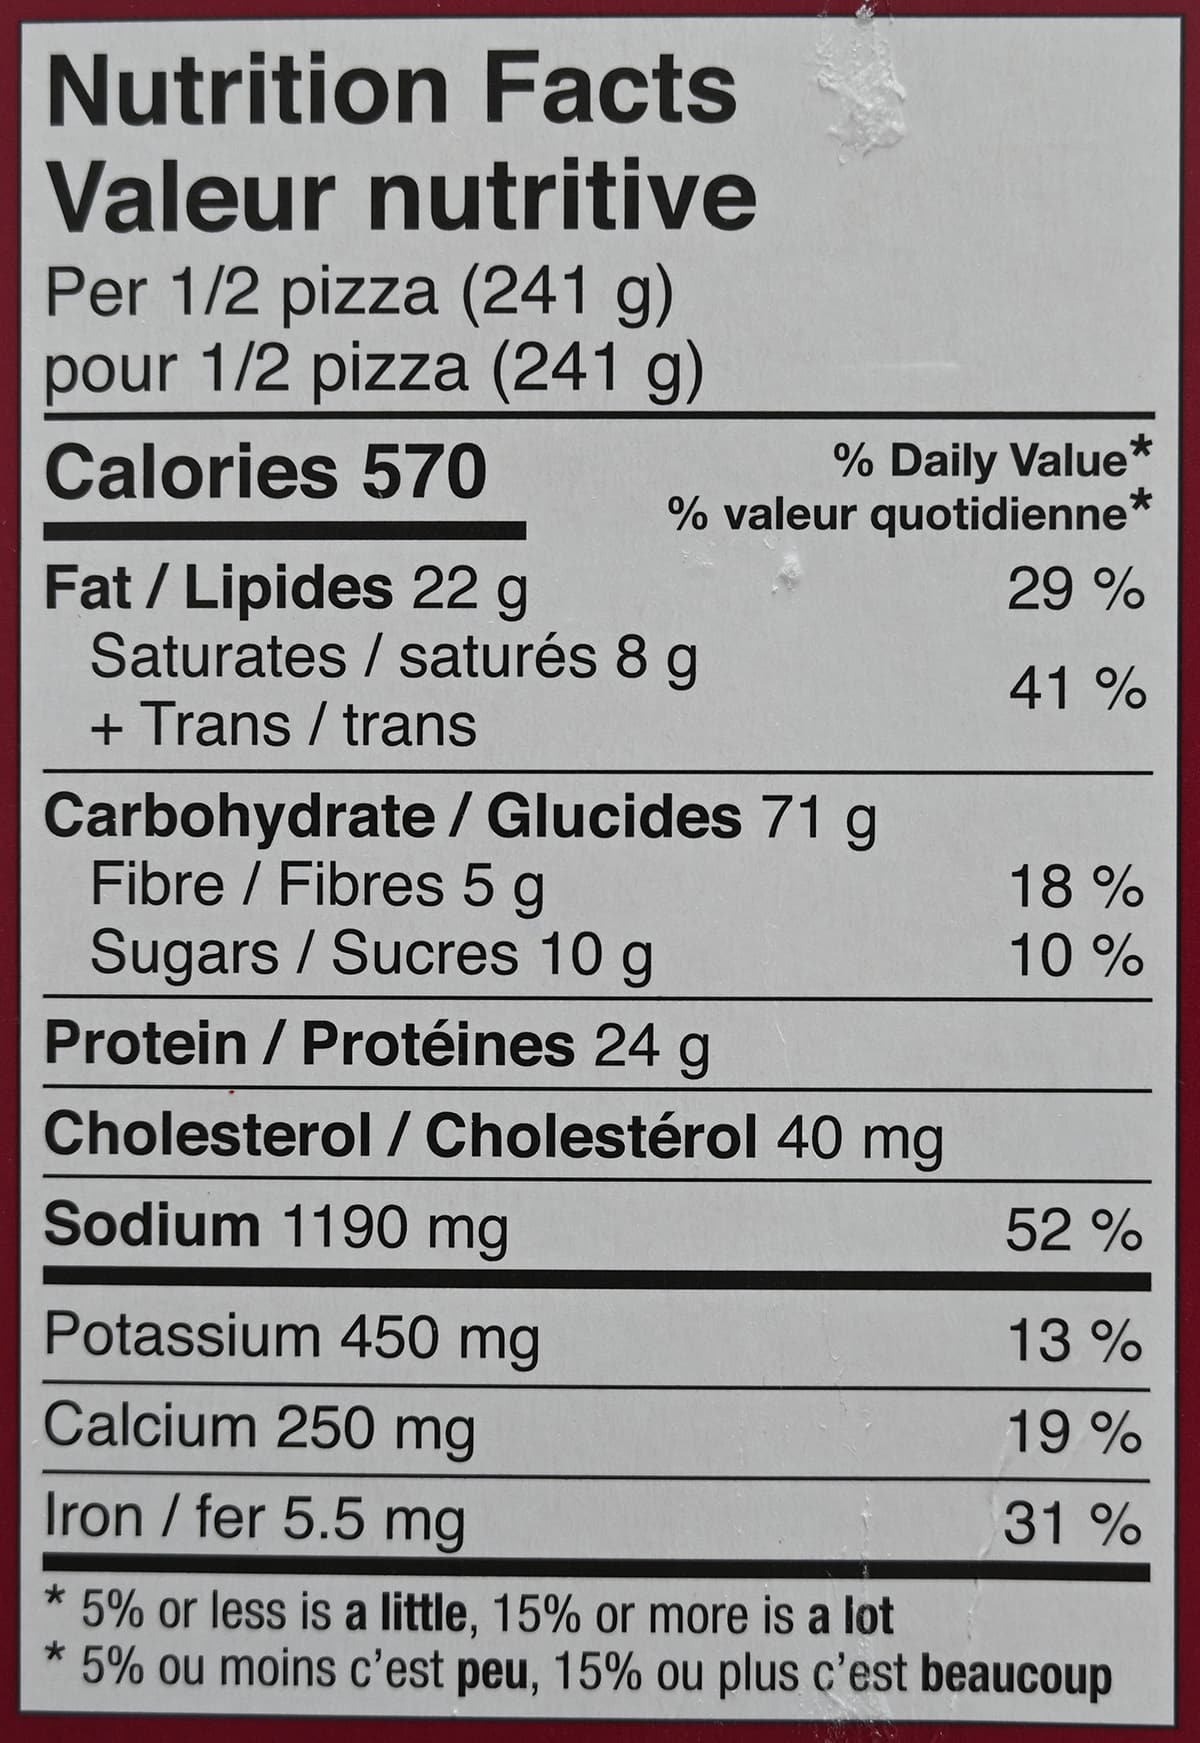 Image of the salami, sausage, arugula & grilled peppers nutrition facts.